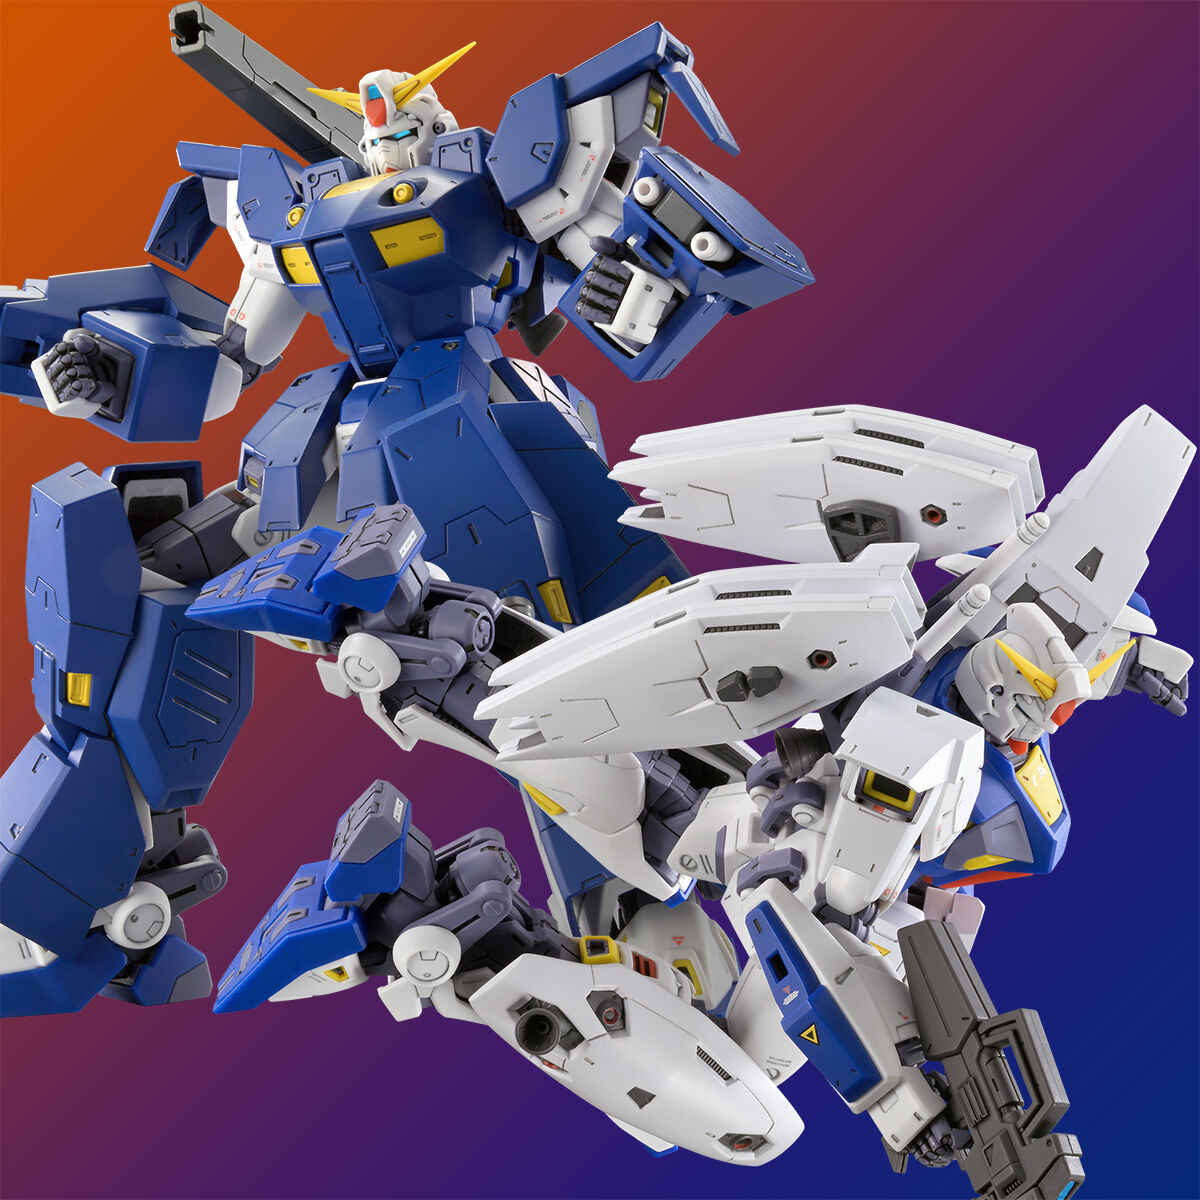 MG 1/100 Mission Pack J-Type+Q-Type Expansion Parts For Formula 90 Gundam F90